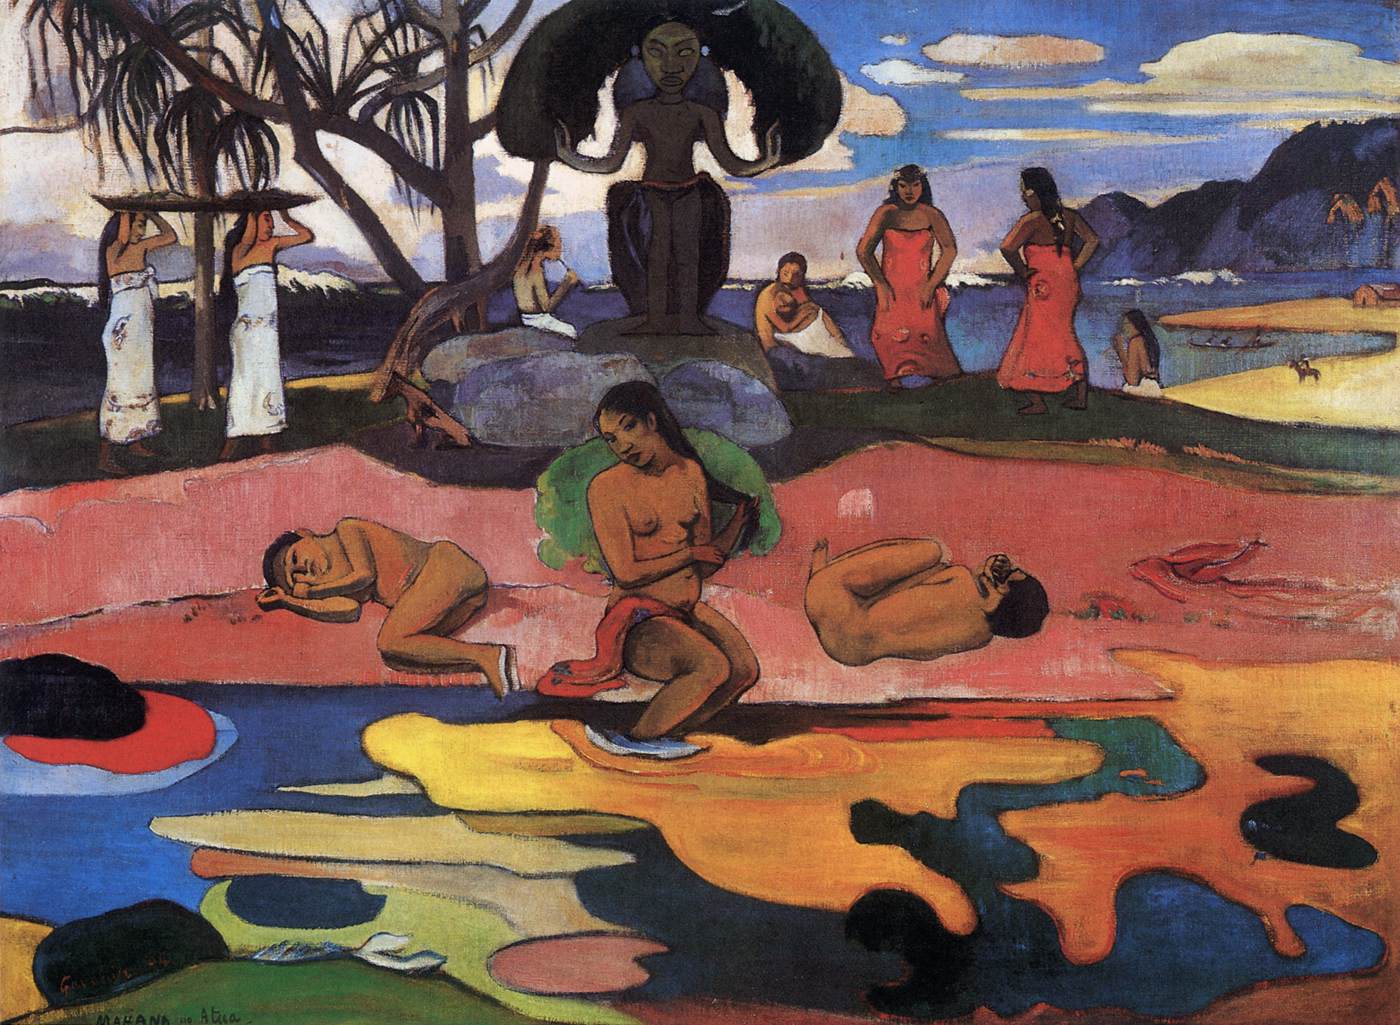 Paul Gauguin, Mahana no atua (Day of the God), 1894, oil on canvas, 26 7/8 x 36 inches (Art Institute of Chicago)